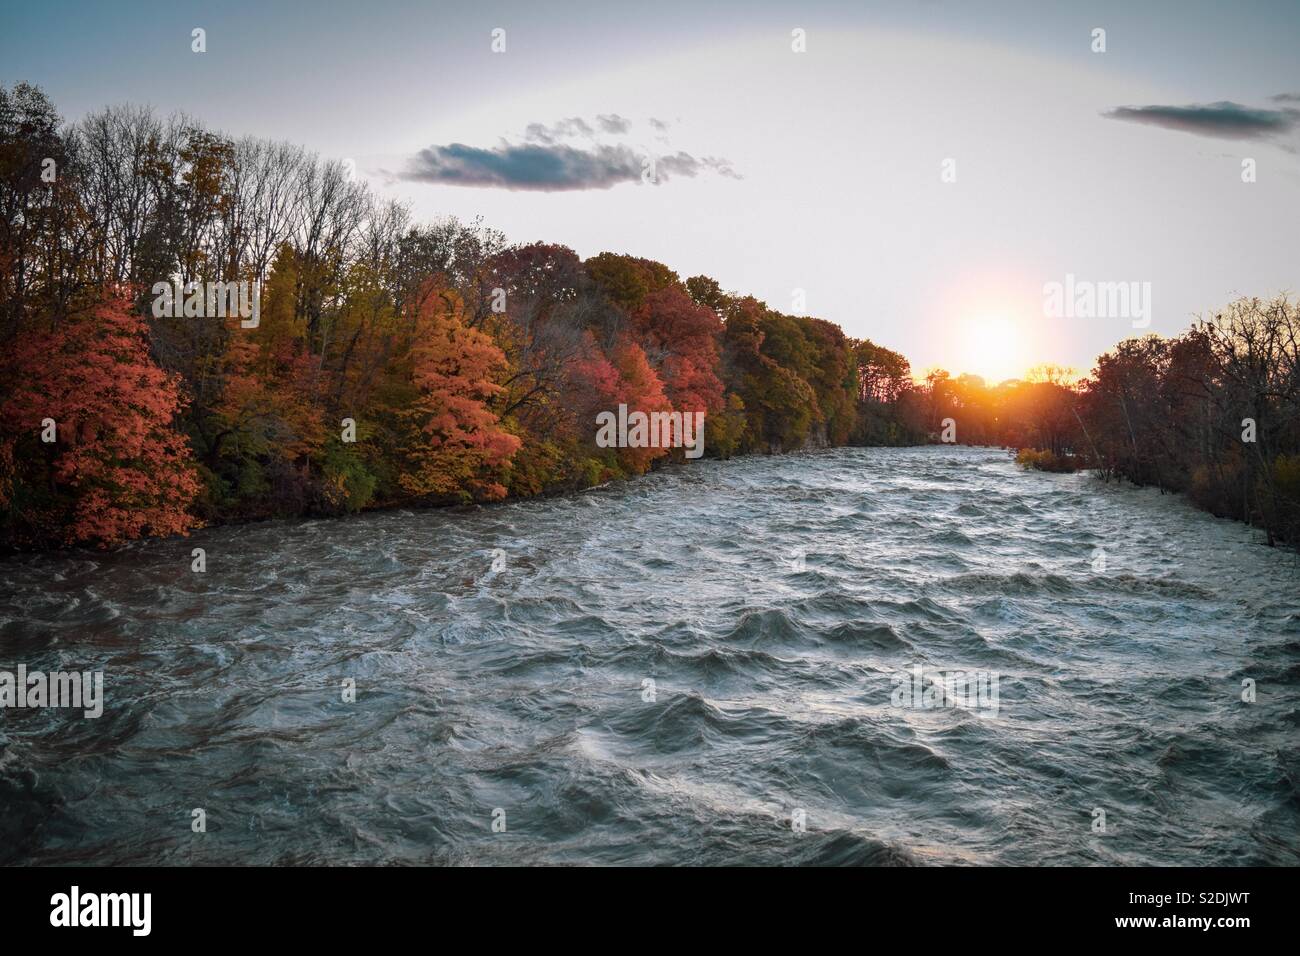 The colors of fall over a raging river at sunset Stock Photo